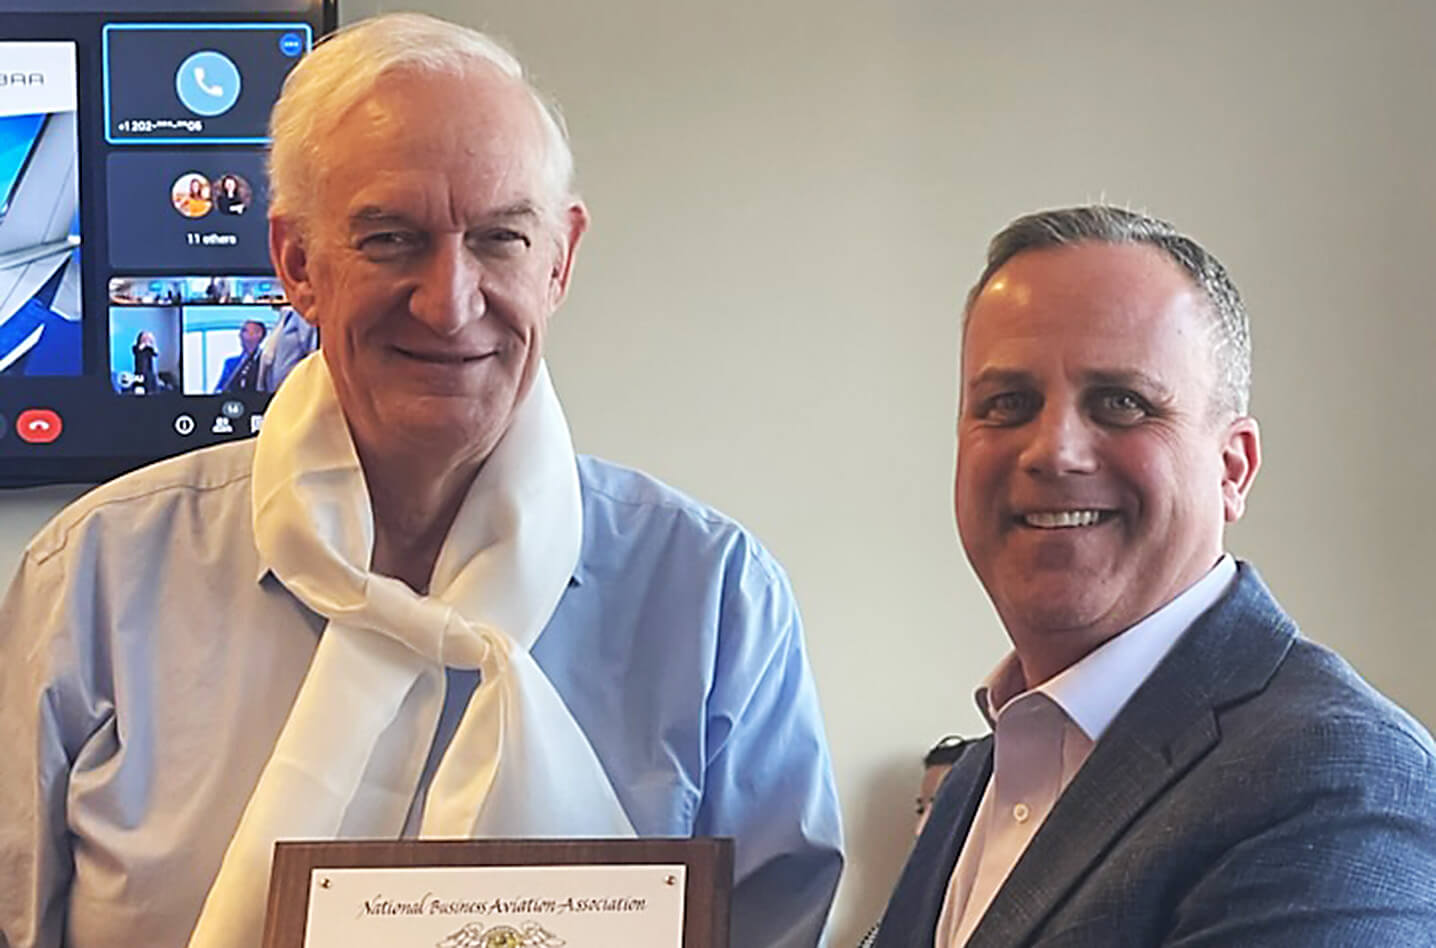 Bob Searles (left) is presented with the Silk Scarf Award by Dan Hubbard, senior vice president, communications